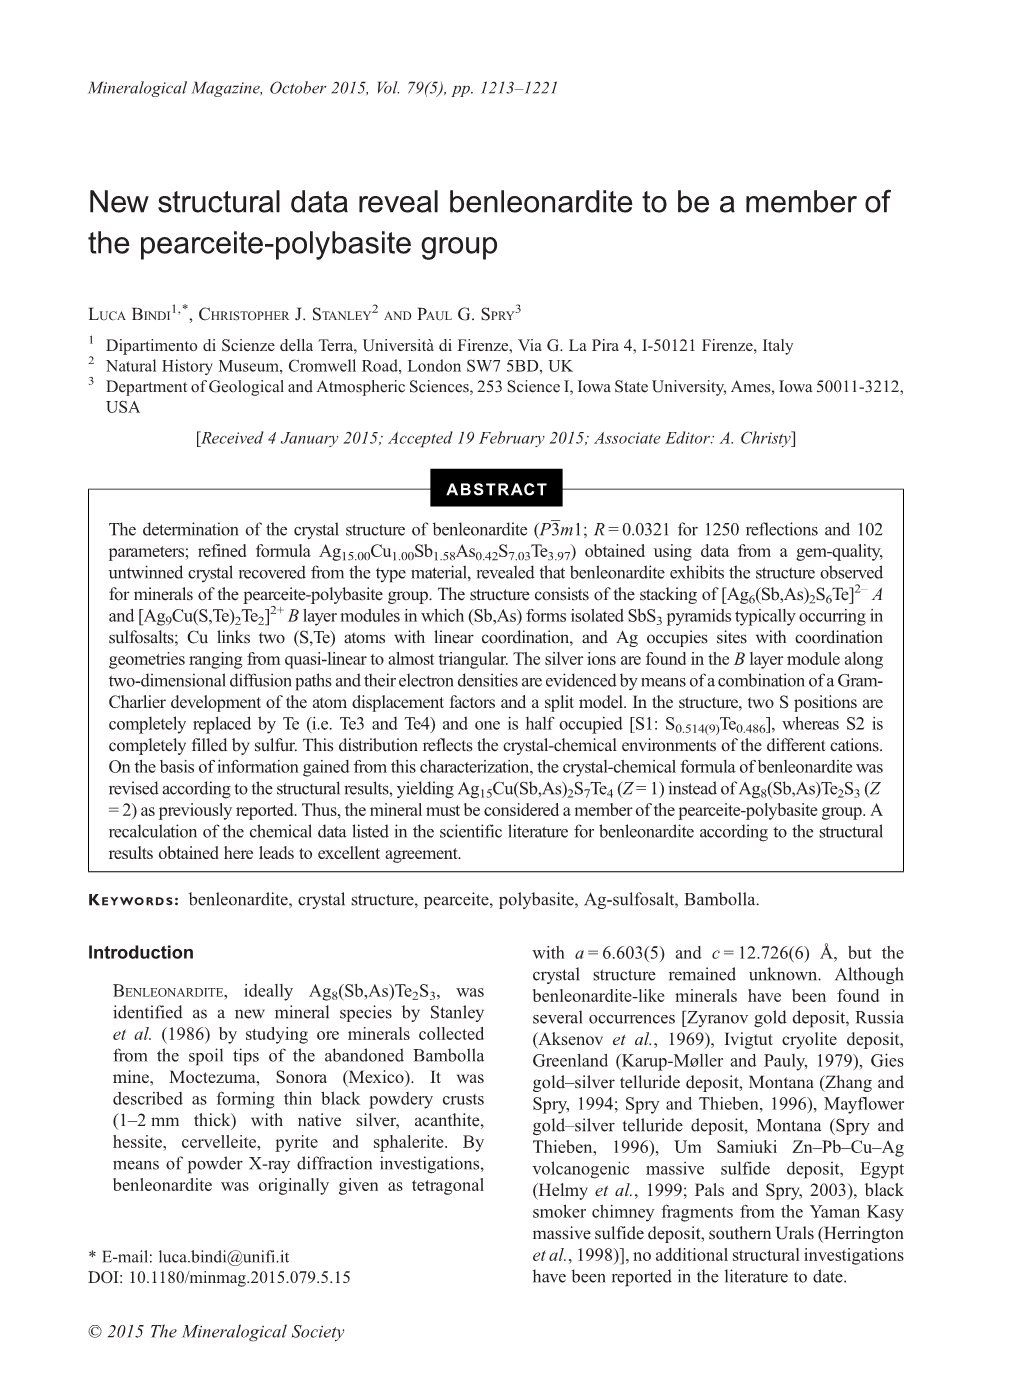 New Structural Data Reveal Benleonardite to Be a Member of the Pearceite-Polybasite Group